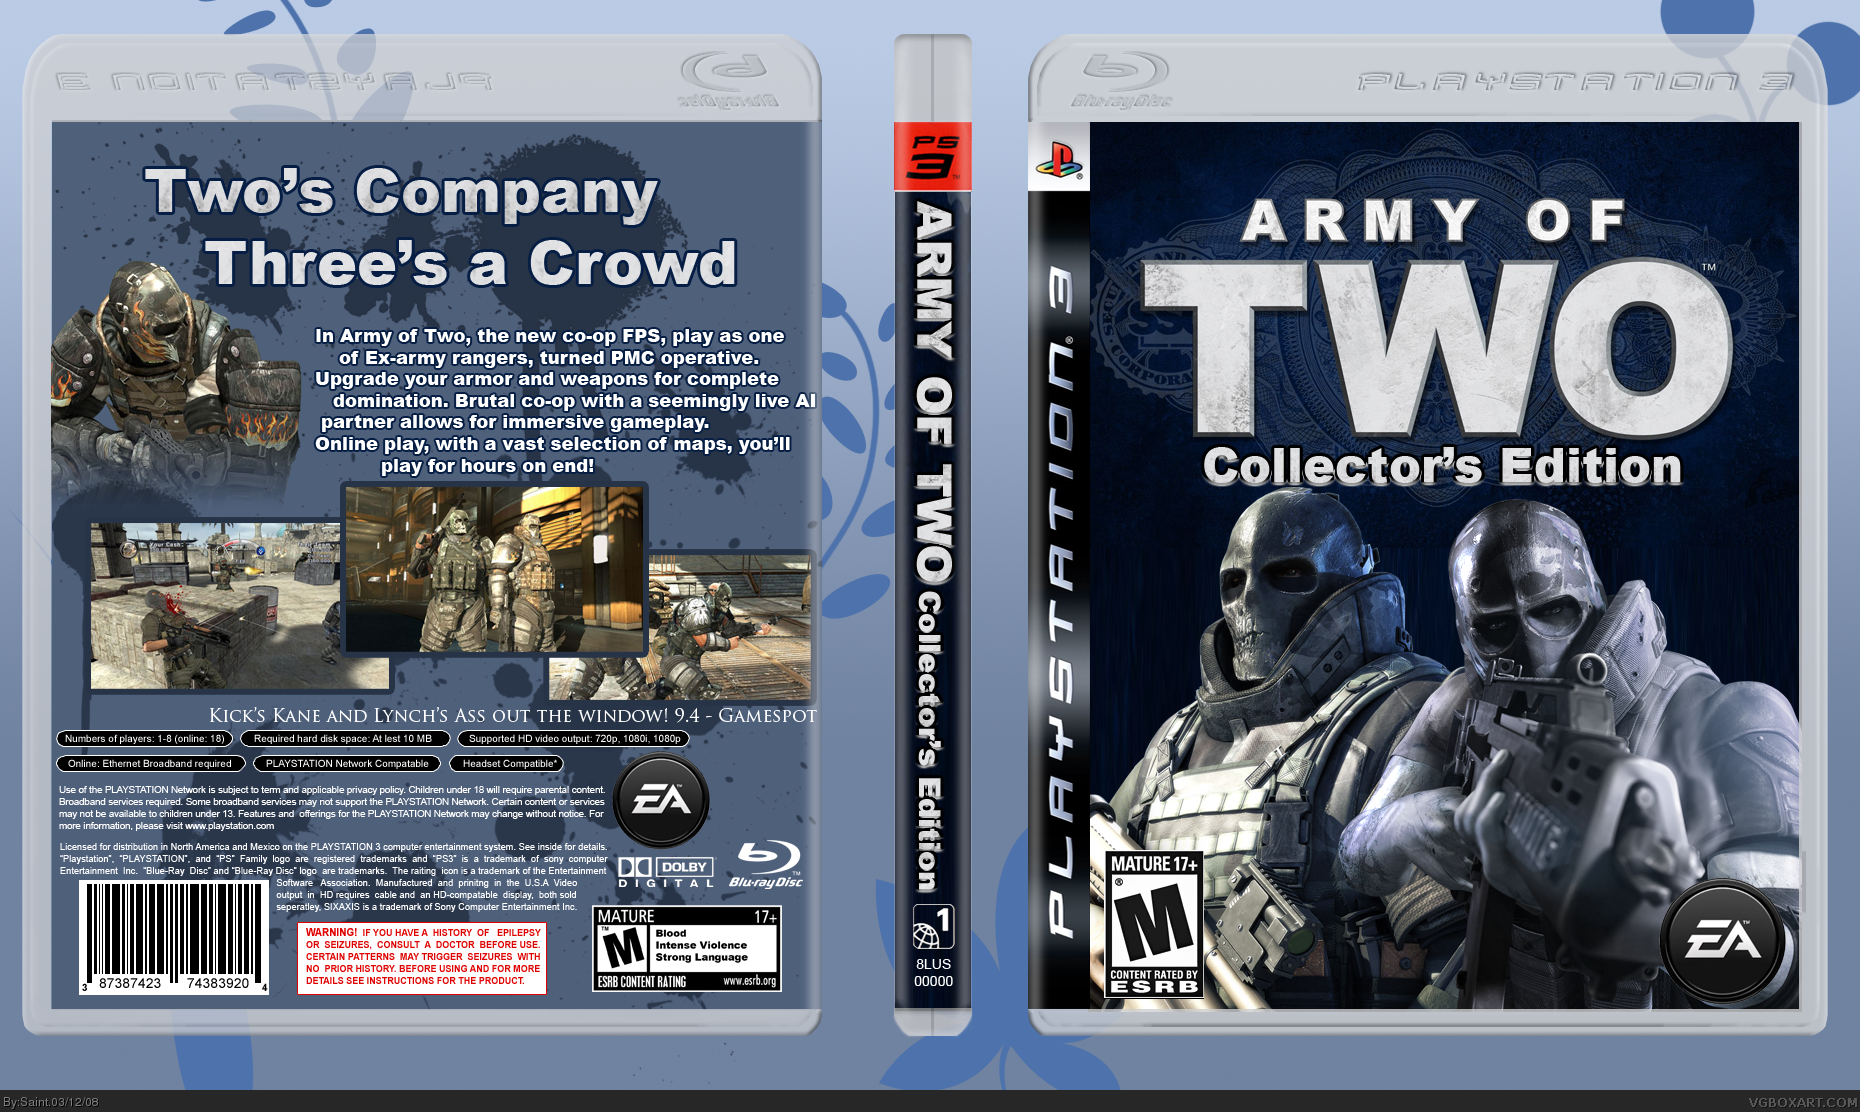 Army of Two: Collector's Edition box cover